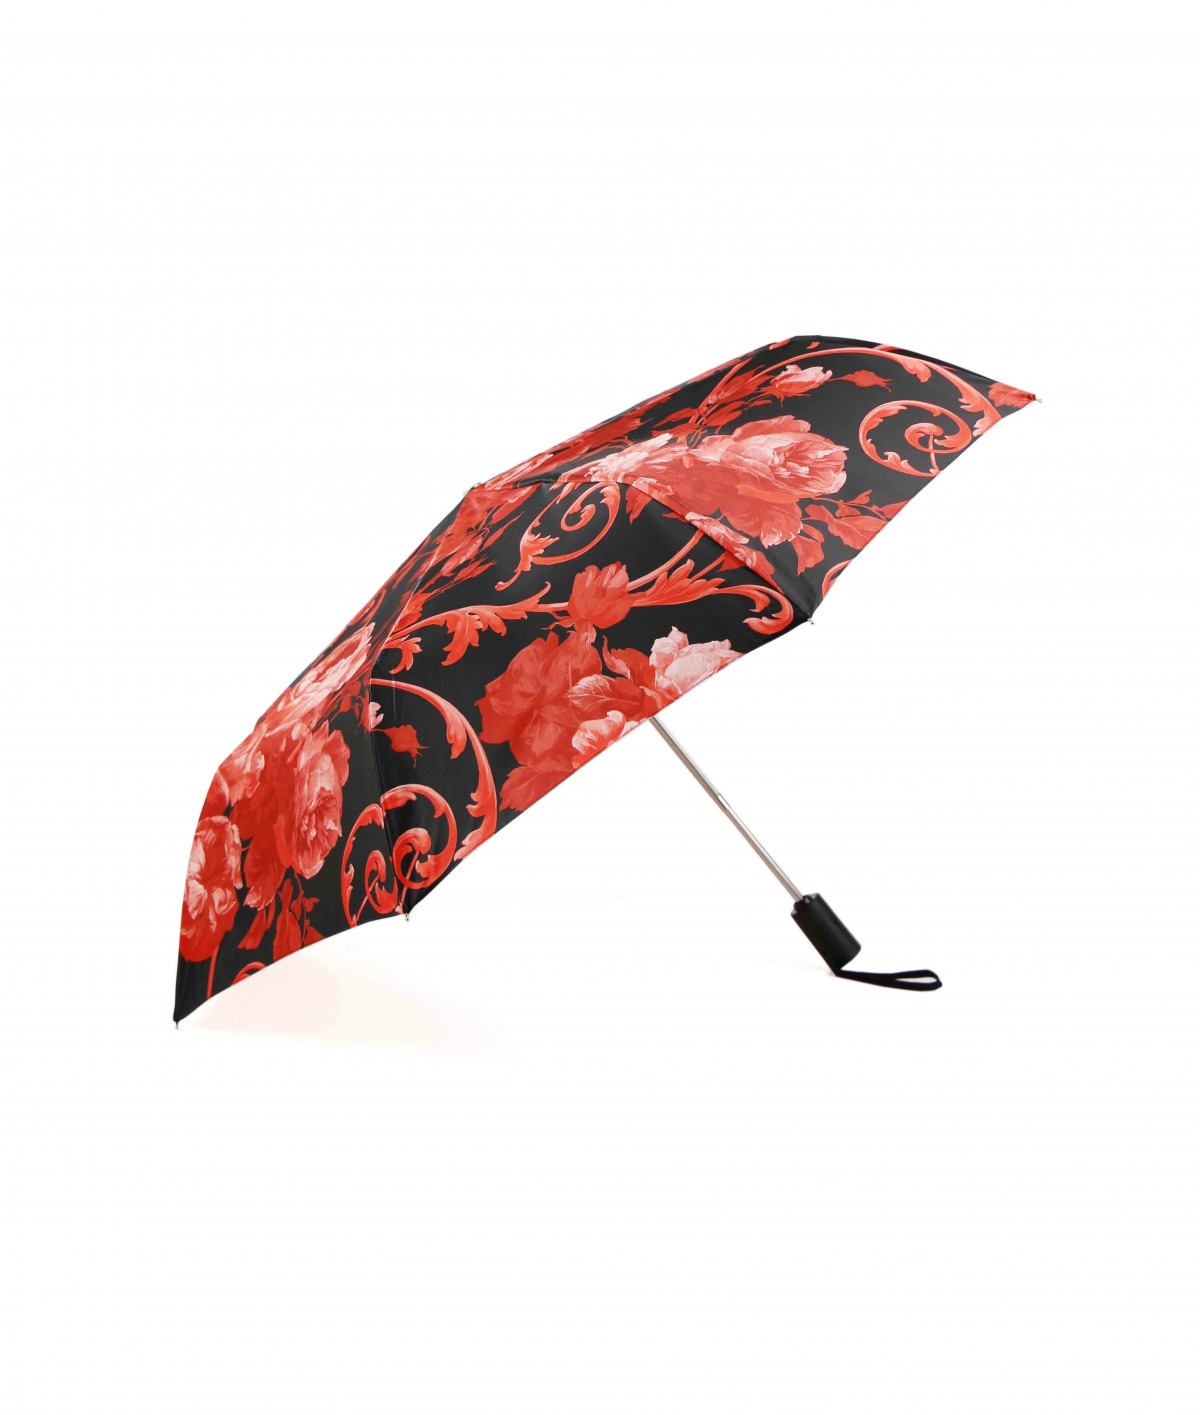 → Fancy Printed Satin Umbrella - Automatic Folding - N°20 - Made in France by Maison Pierre Vaux